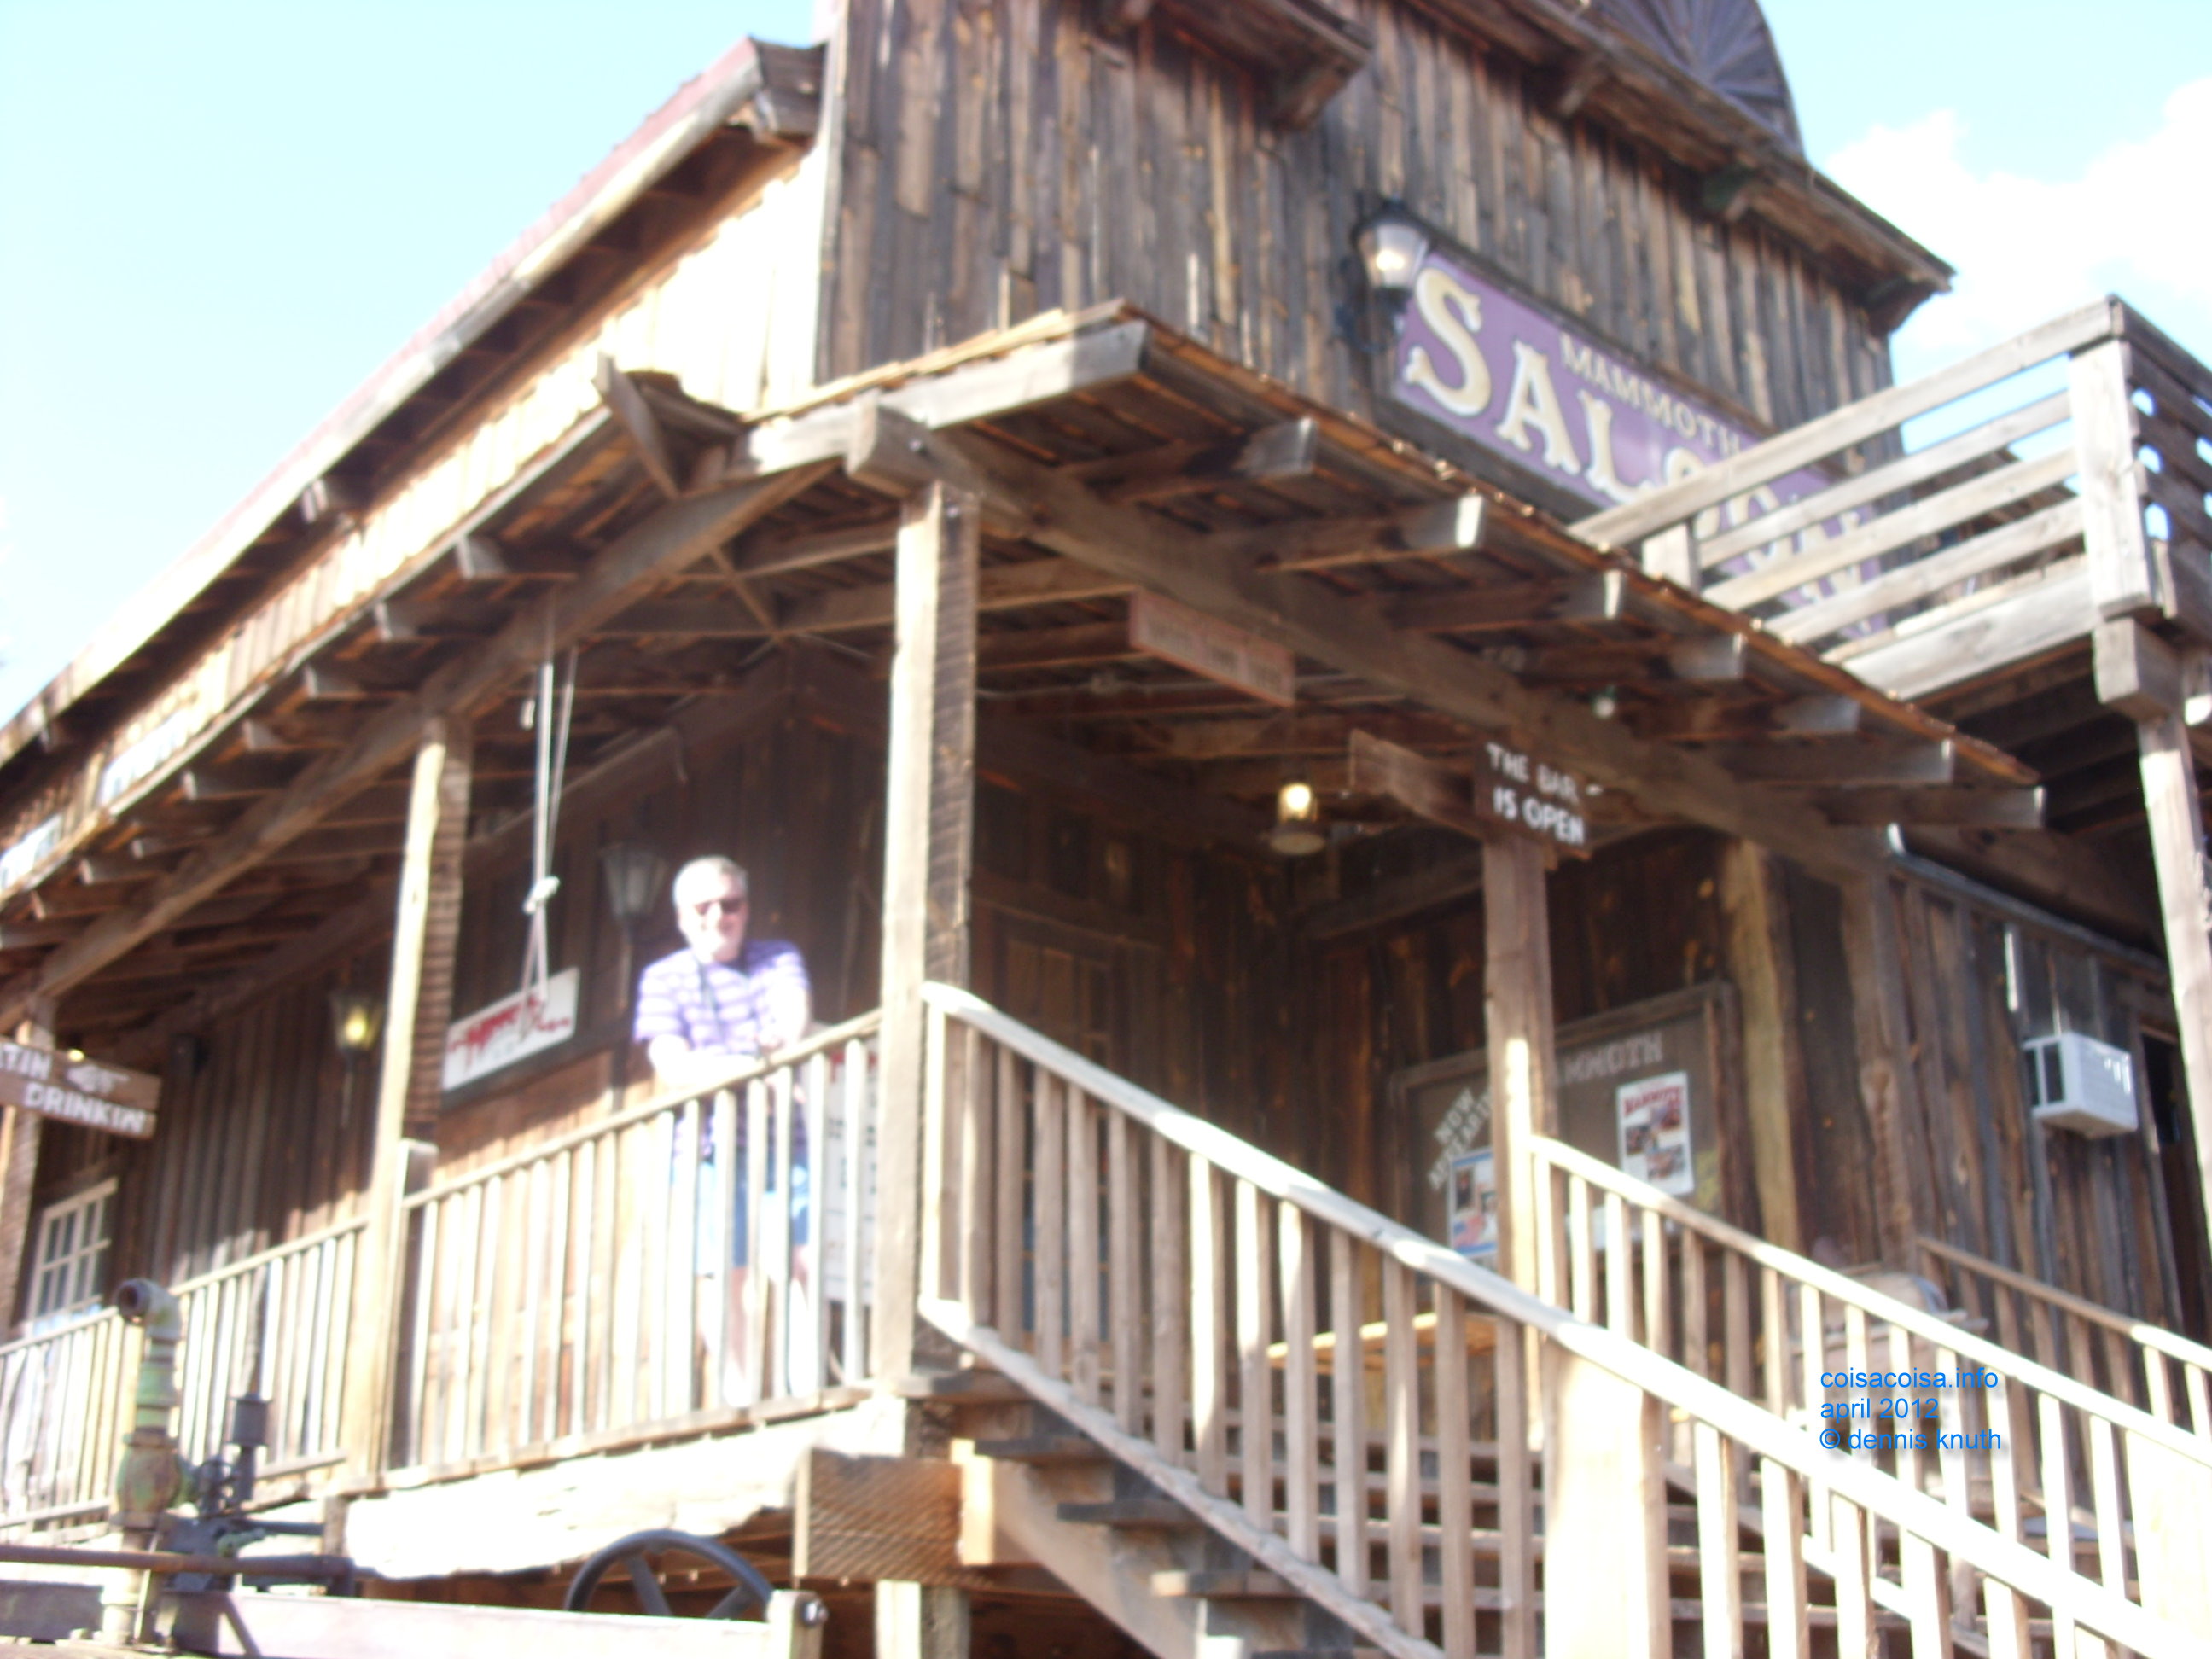 2012_04_26_e_apache_junction_ghost_town_0031.jpg (large)